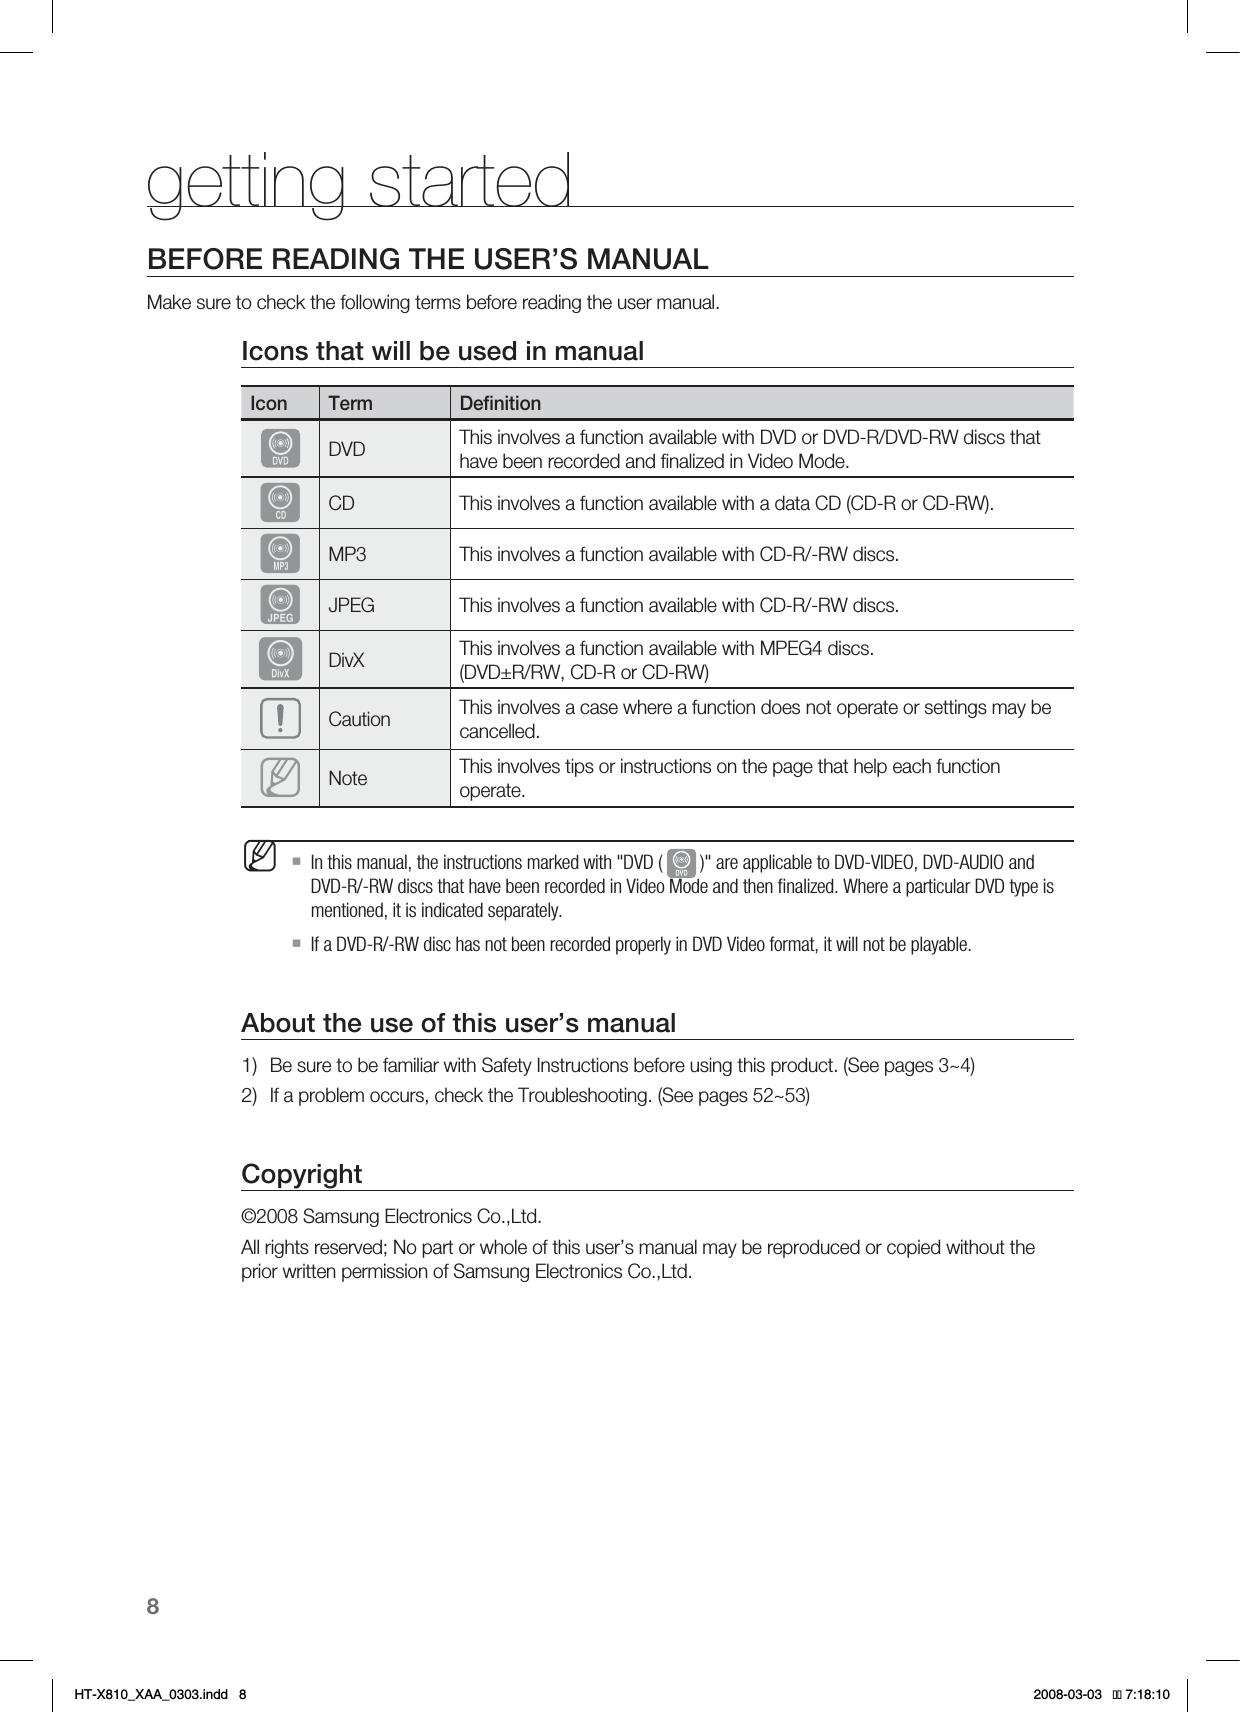 8getting startedBEFORE READING THE USER’S MANUALMake sure to check the following terms before reading the user manual.Icons that will be used in manualIcon Term DeﬁnitionDVD This involves a function available with DVD or DVD-R/DVD-RW discs that have been recorded and ﬁnalized in Video Mode.BCD This involves a function available with a data CD (CD-R or CD-RW).AMP3 This involves a function available with CD-R/-RW discs.GJPEG This involves a function available with CD-R/-RW discs.DDivX This involves a function available with MPEG4 discs. (DVD±R/RW, CD-R or CD-RW)Caution This involves a case where a function does not operate or settings may be cancelled.MNote This involves tips or instructions on the page that help each function operate.In this manual, the instructions marked with &quot;DVD (   )&quot; are applicable to DVD-VIDEO, DVD-AUDIO and DVD-R/-RW discs that have been recorded in Video Mode and then ﬁnalized. Where a particular DVD type is mentioned, it is indicated separately.  If a DVD-R/-RW disc has not been recorded properly in DVD Video format, it will not be playable.About the use of this user’s manualBe sure to be familiar with Safety Instructions before using this product. (See pages 3~4)If a problem occurs, check the Troubleshooting. (See pages 52~53)Copyright©2008 Samsung Electronics Co.,Ltd.All rights reserved; No part or whole of this user’s manual may be reproduced or copied without the prior written permission of Samsung Electronics Co.,Ltd.M1)2)HT-X810_XAA_0303.indd   8 